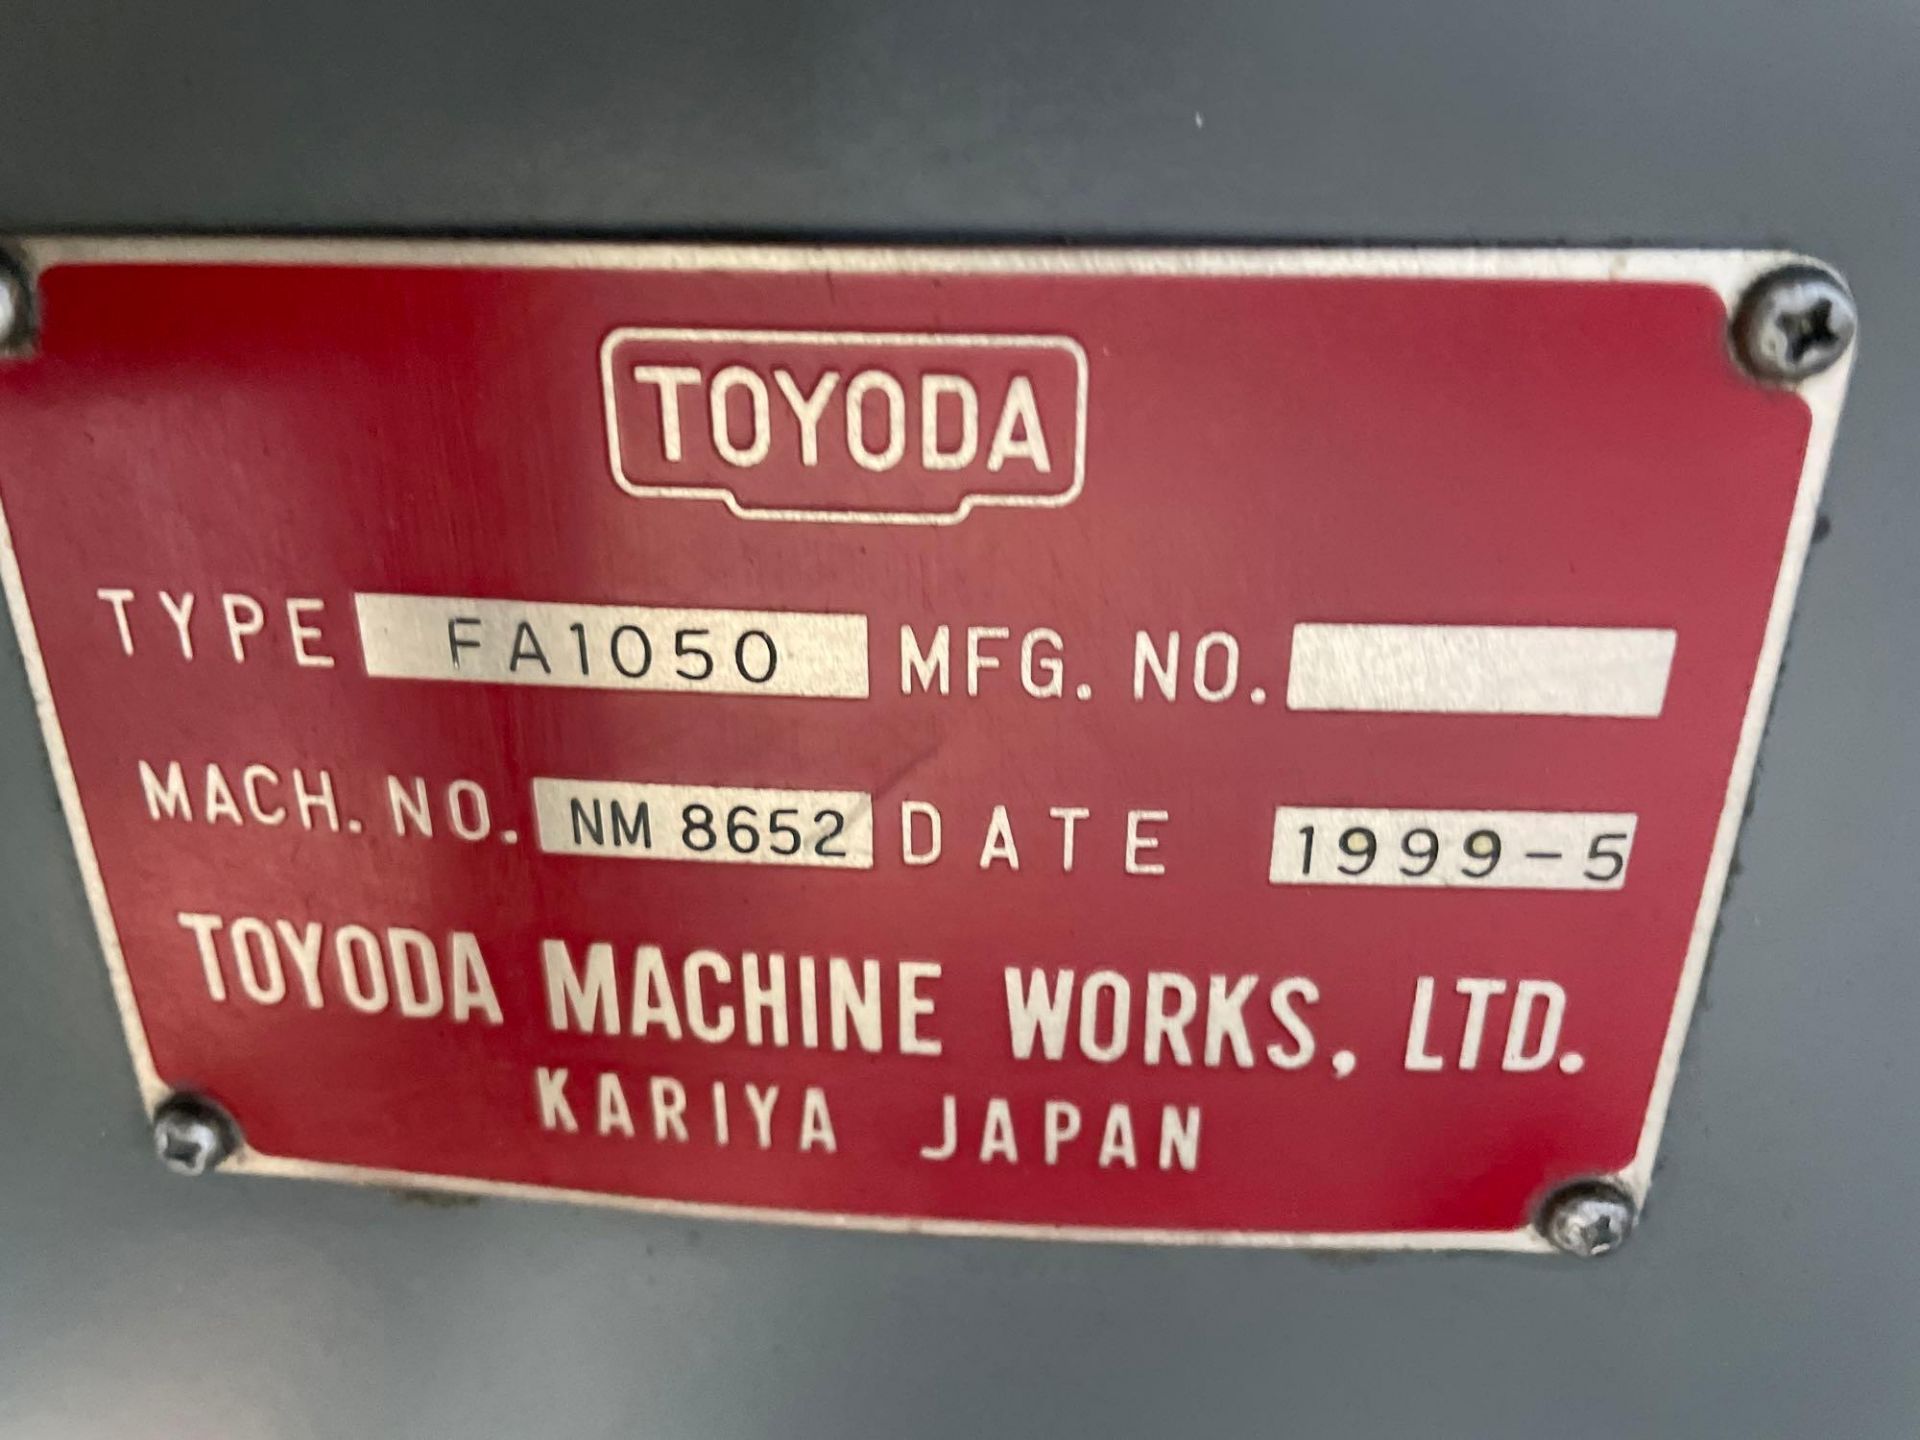 Toyoda FA1050 4 Axis, Fanuc 21i Ctrl, 41” Pallet, 120ATC, CT-50, Chip Conveyor, s/n NM8652, 1999 - Image 8 of 8